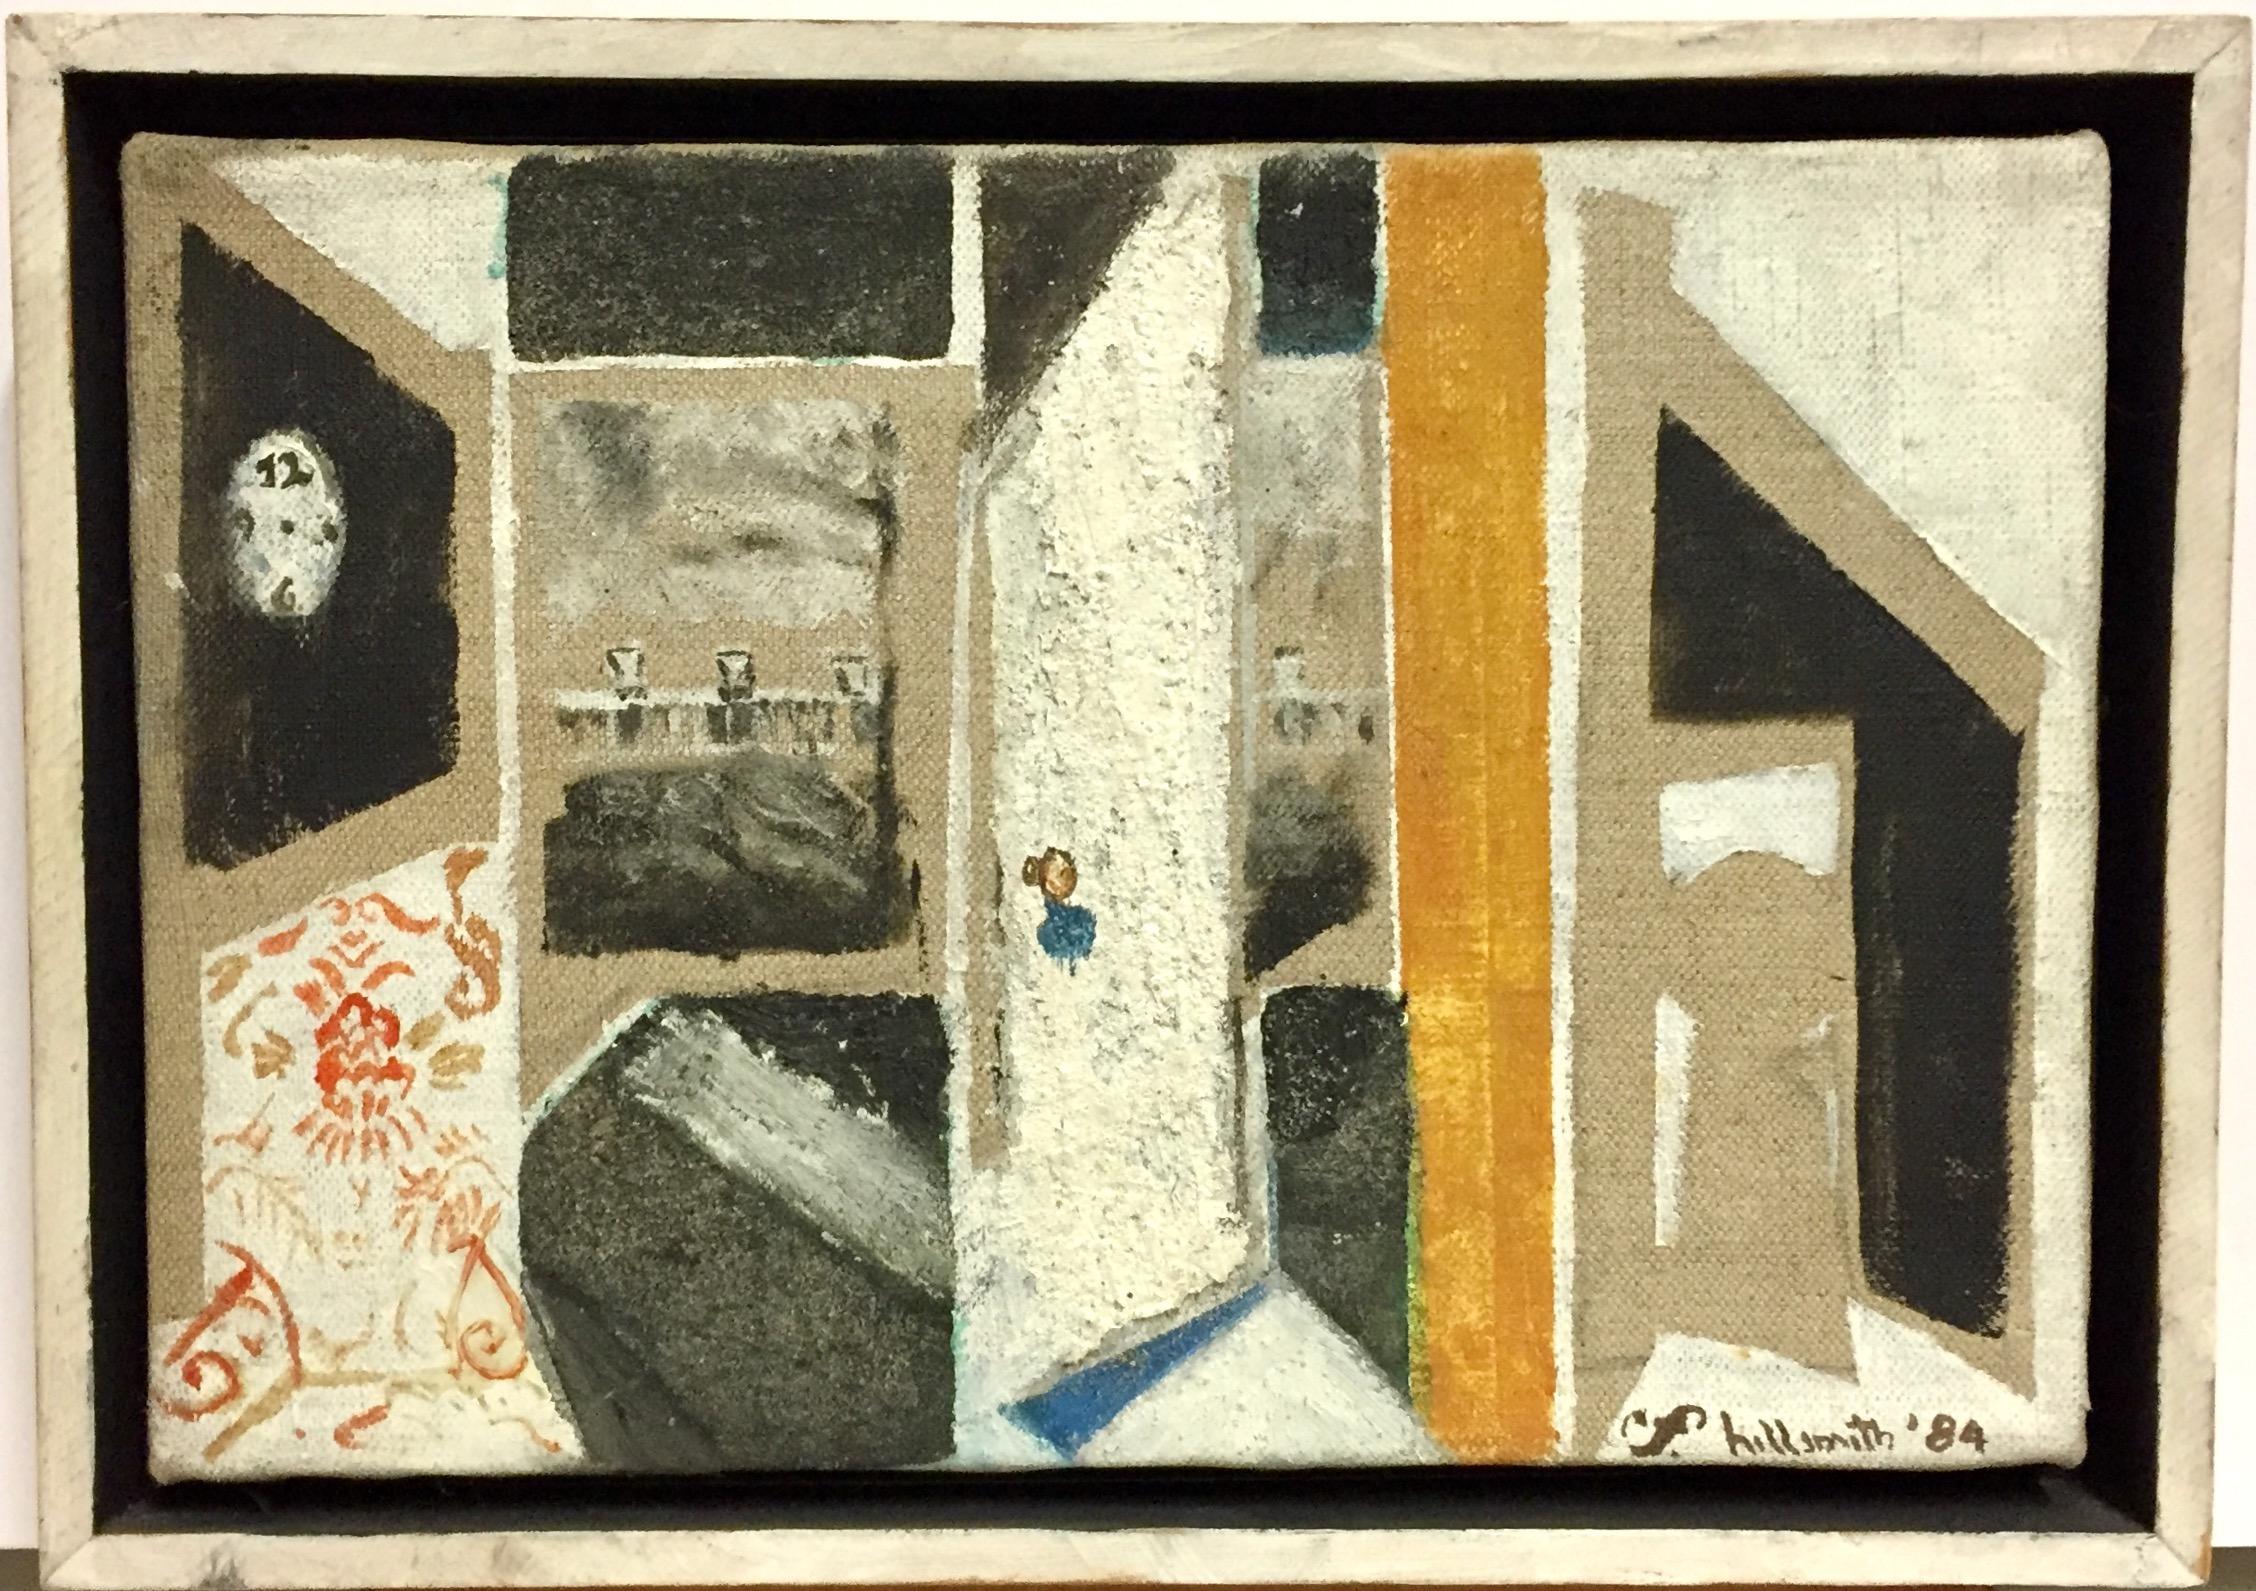 This is a painting on sized linen. The frame is the artist's design and she painted that as well.  It is signed and dated lower right. The motif of an open door is a favorite of the artist's. This composition is deceptive: On close inspection one